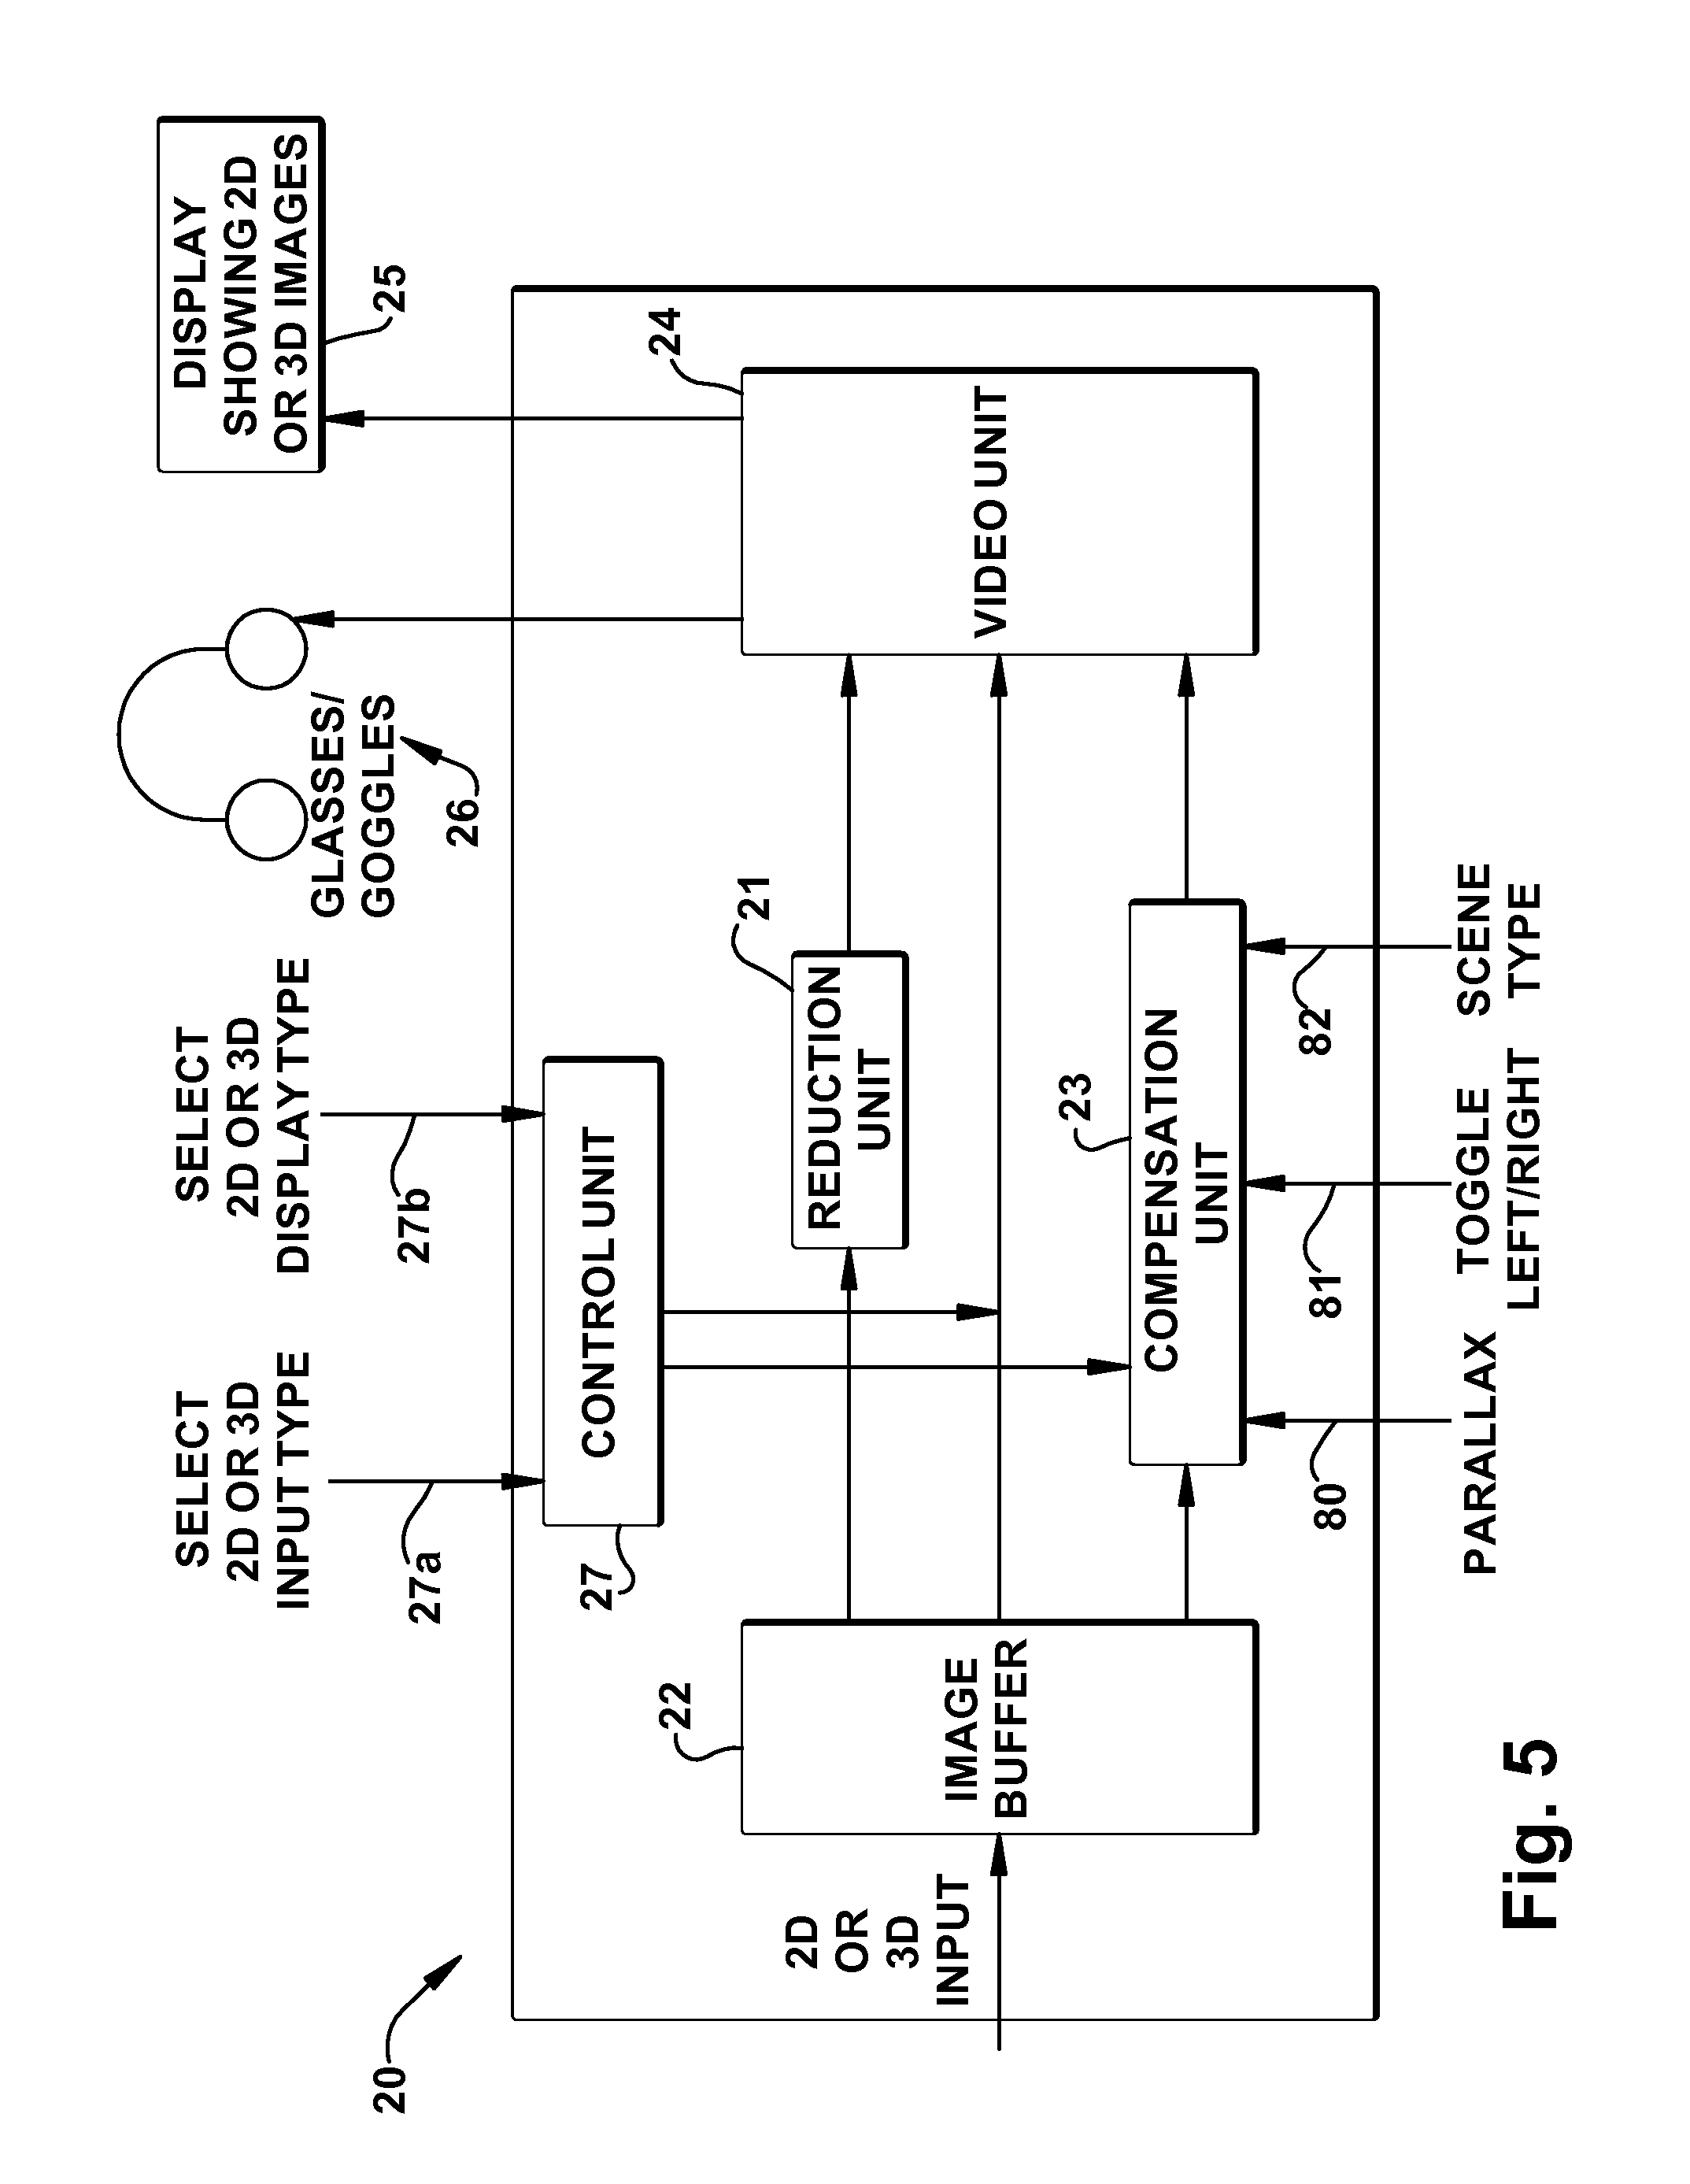 Methods and systems for 2d/3d image conversion and optimization